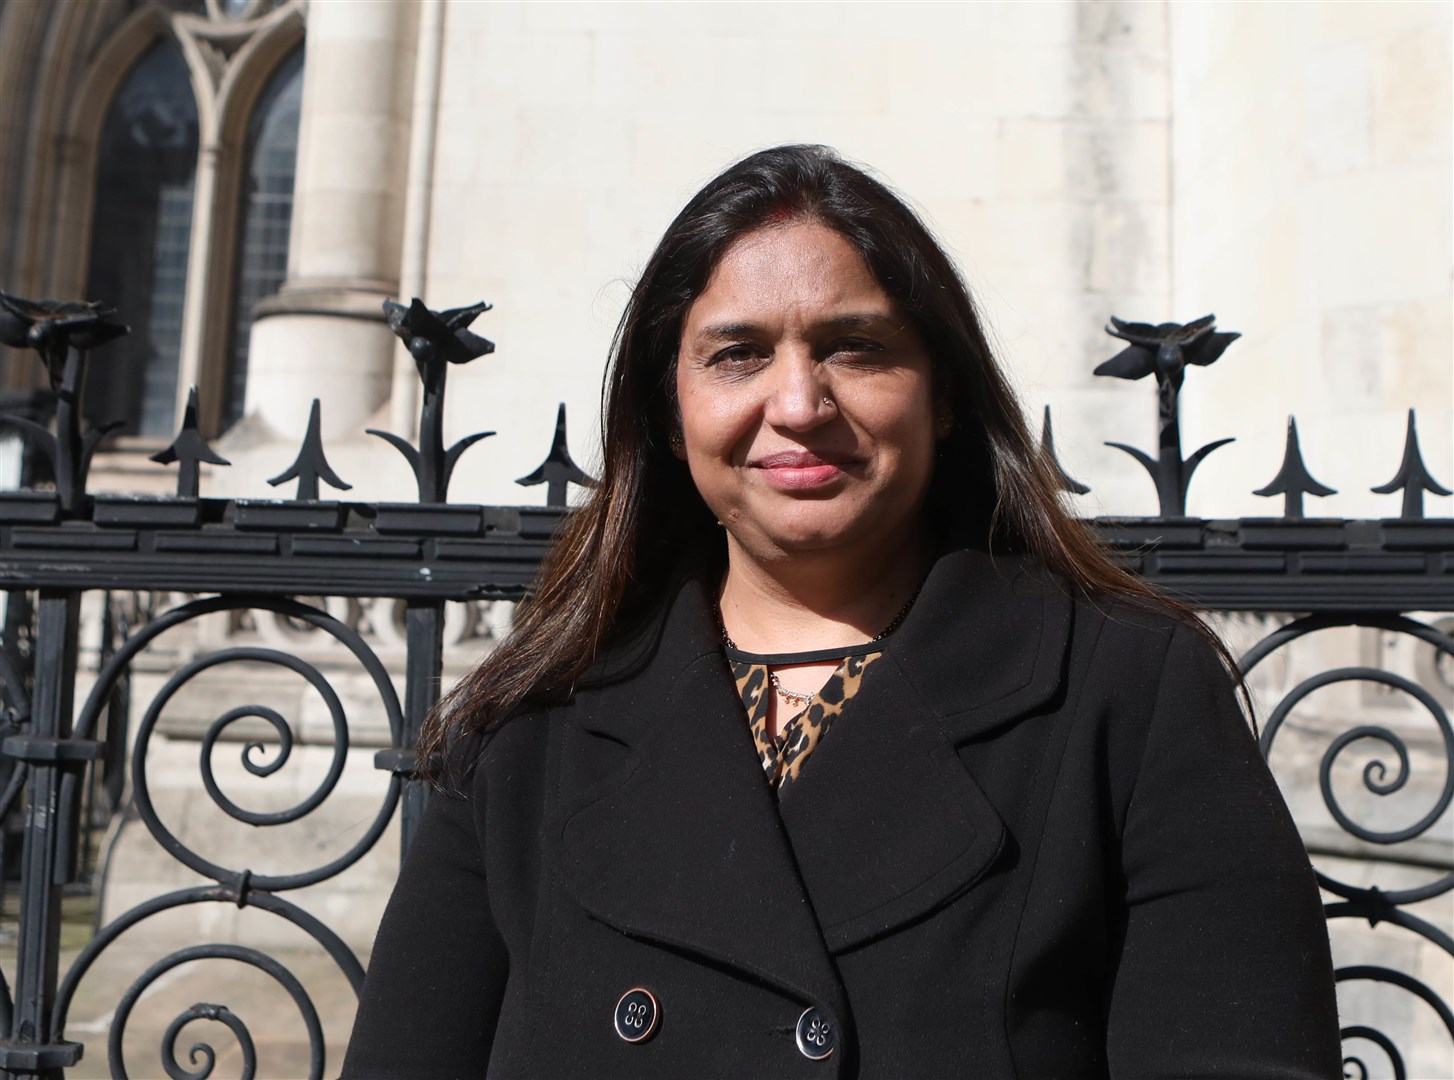 Former subpostmaster Seema Misra was handed a 15-month prison sentence on her son’s 10th birthday in November 2010 after being accused of stealing £74,000 (Luciana Guerra/PA)